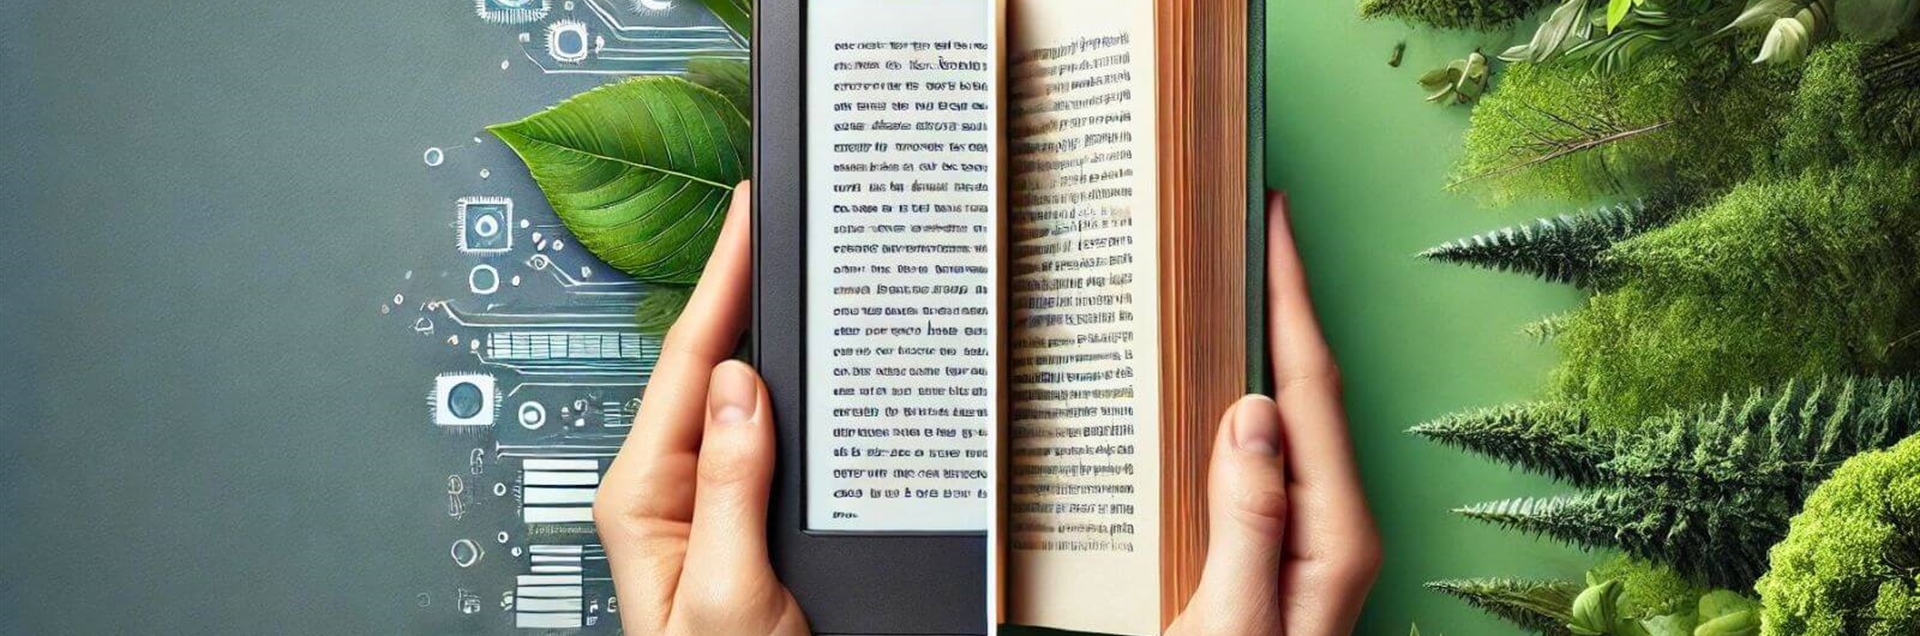 Ebooks vs paper books: which is the more sustainable choice?